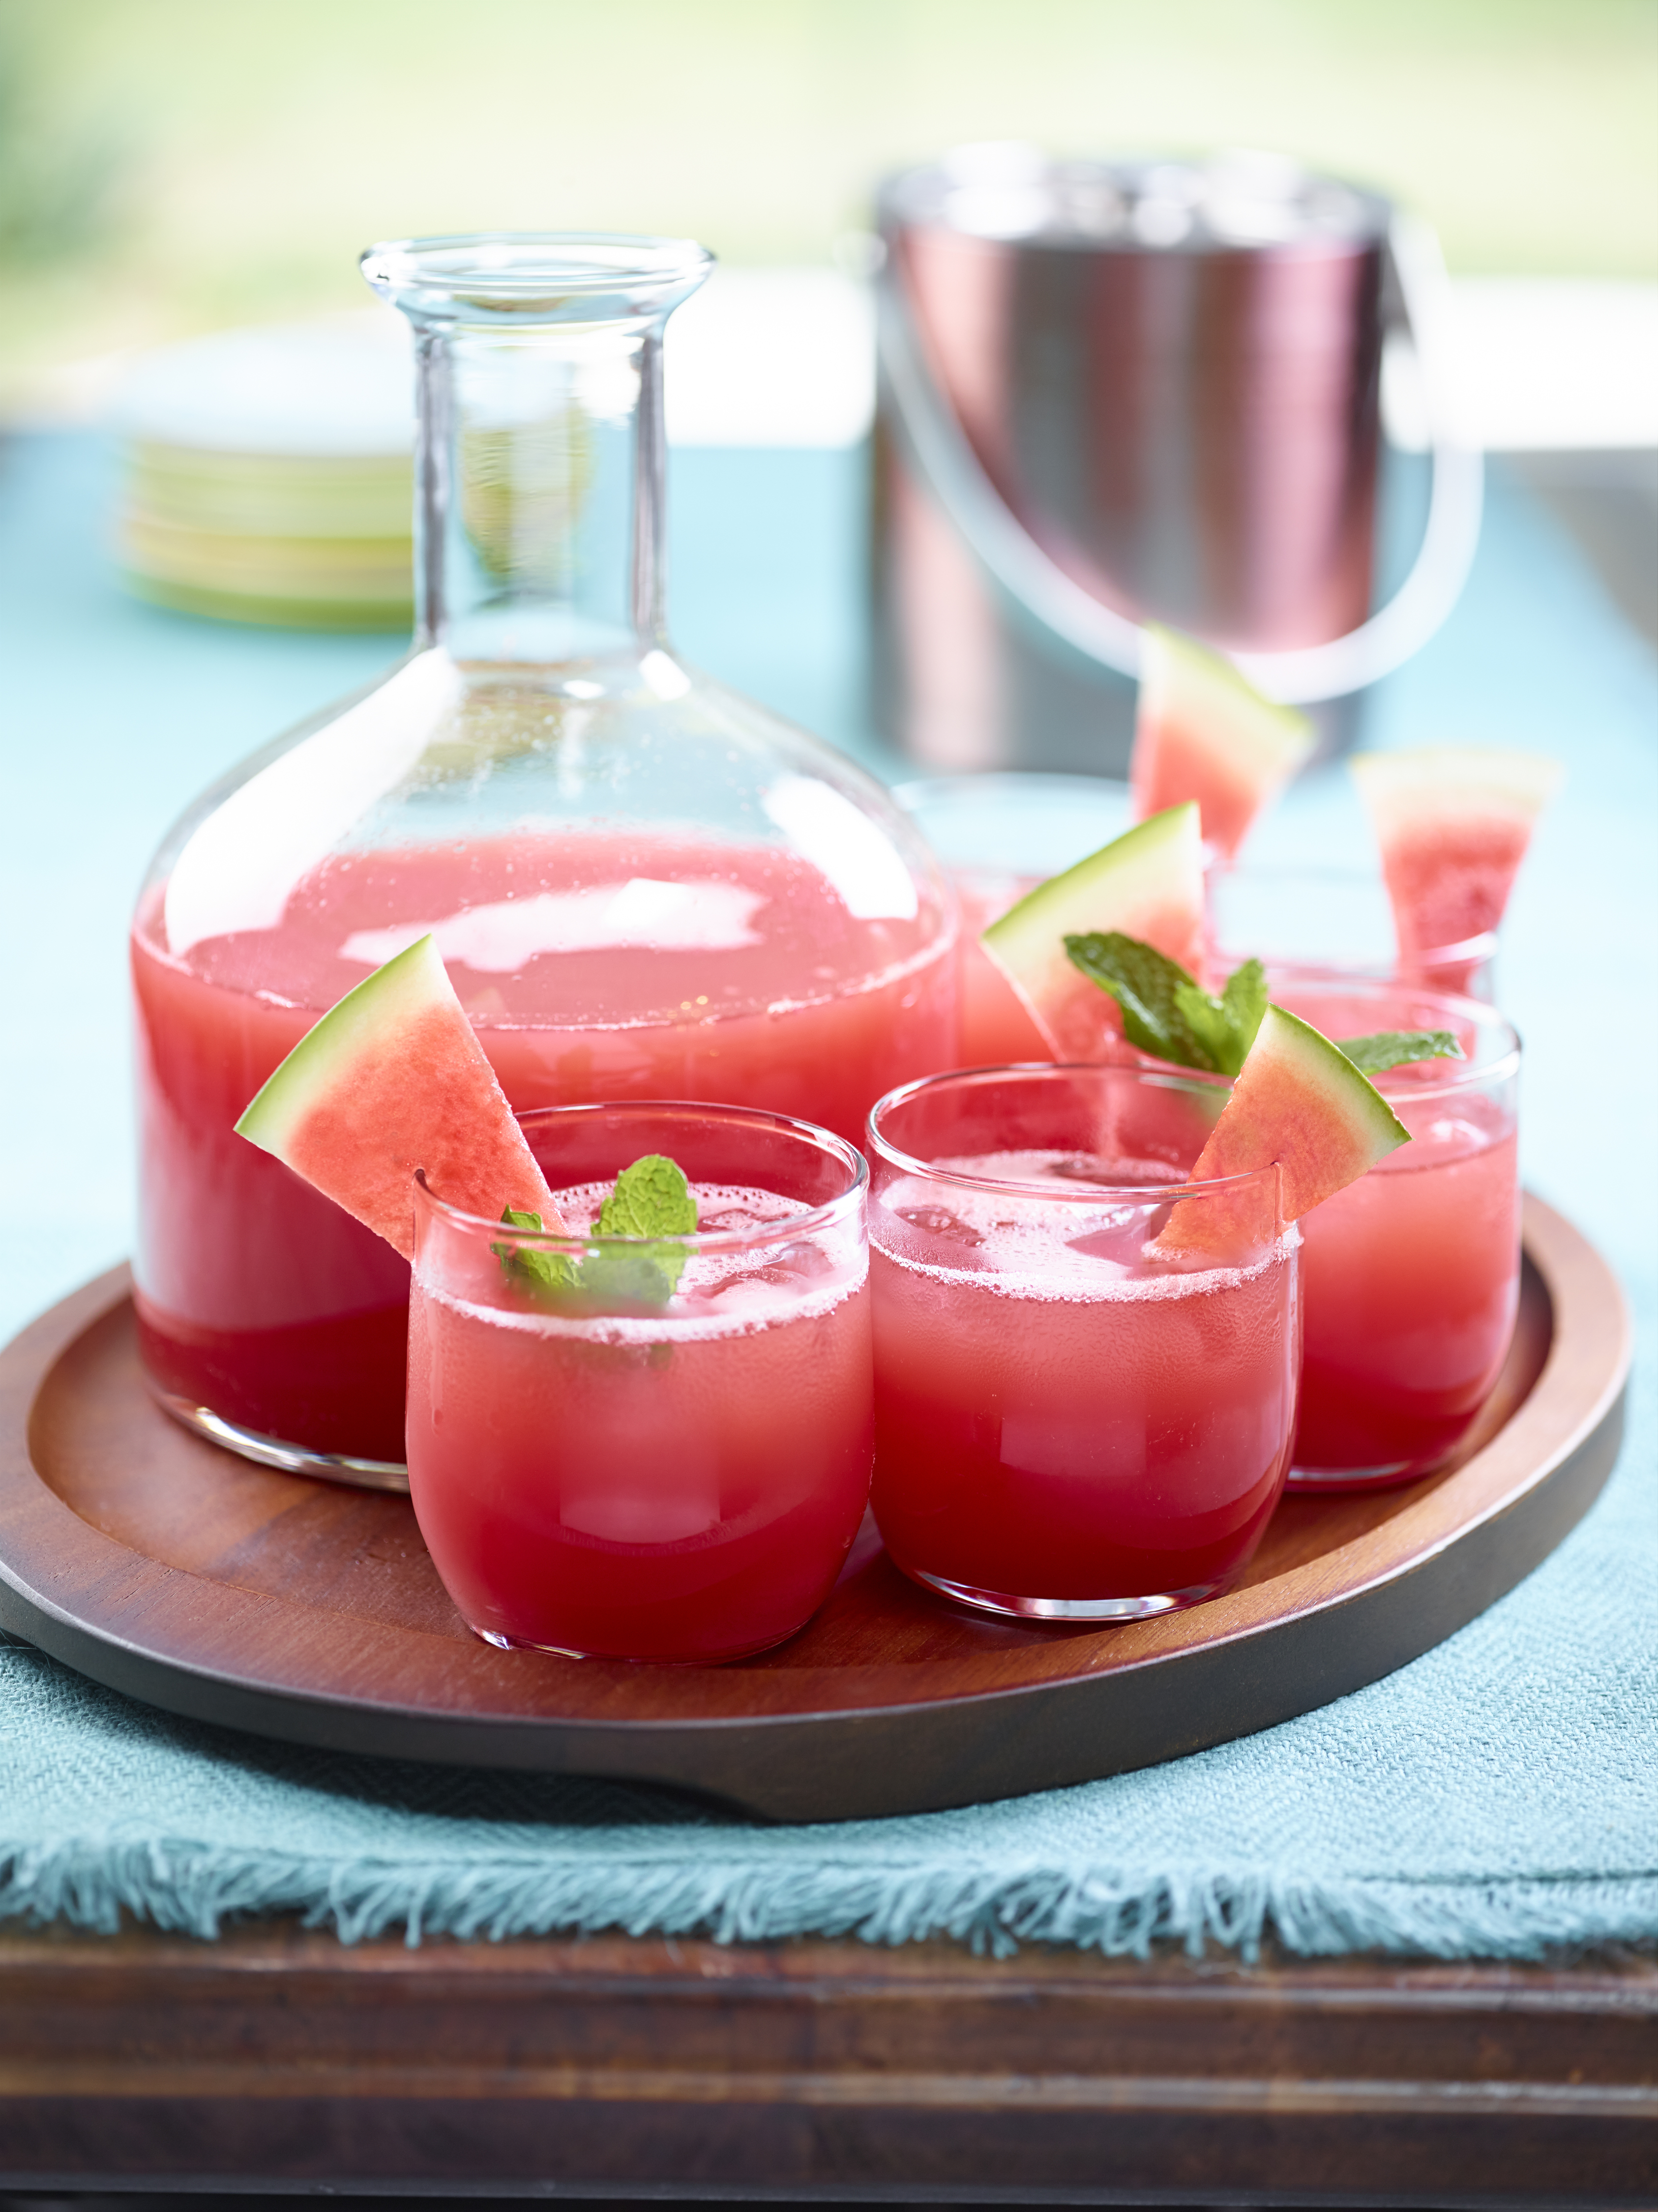 This delicious, easy-to-make watermelon-centric drink is perfect for a romantic evening or anytime!